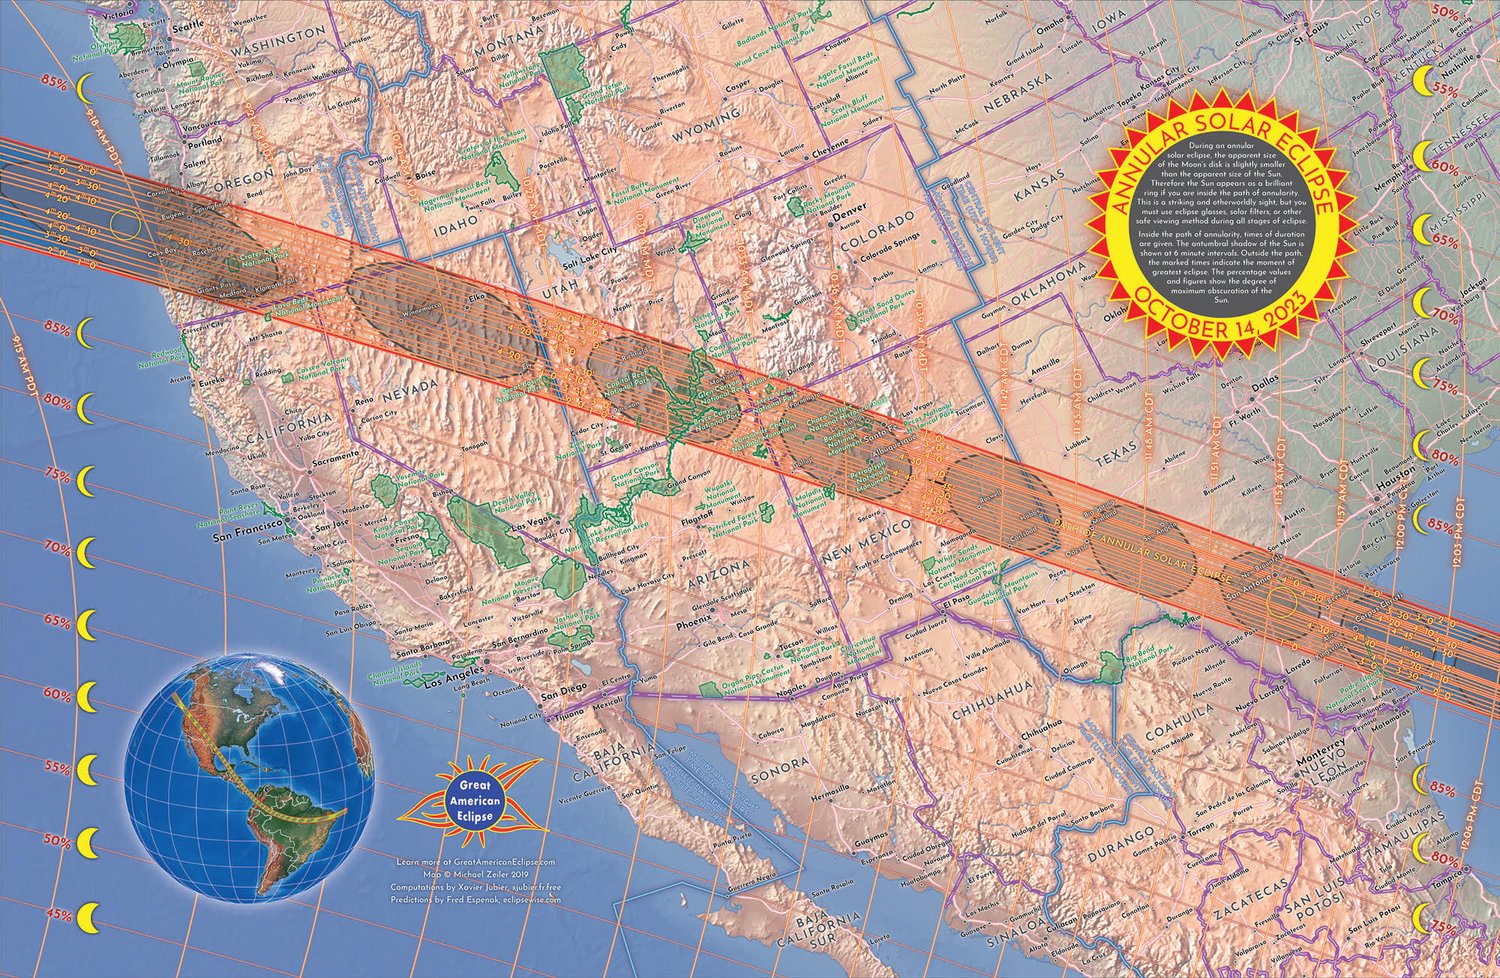 Annular solar eclipse In the US. See the annular solar eclipse path, eclipse times, and see where to view the annular solar eclipse in the US. See dri